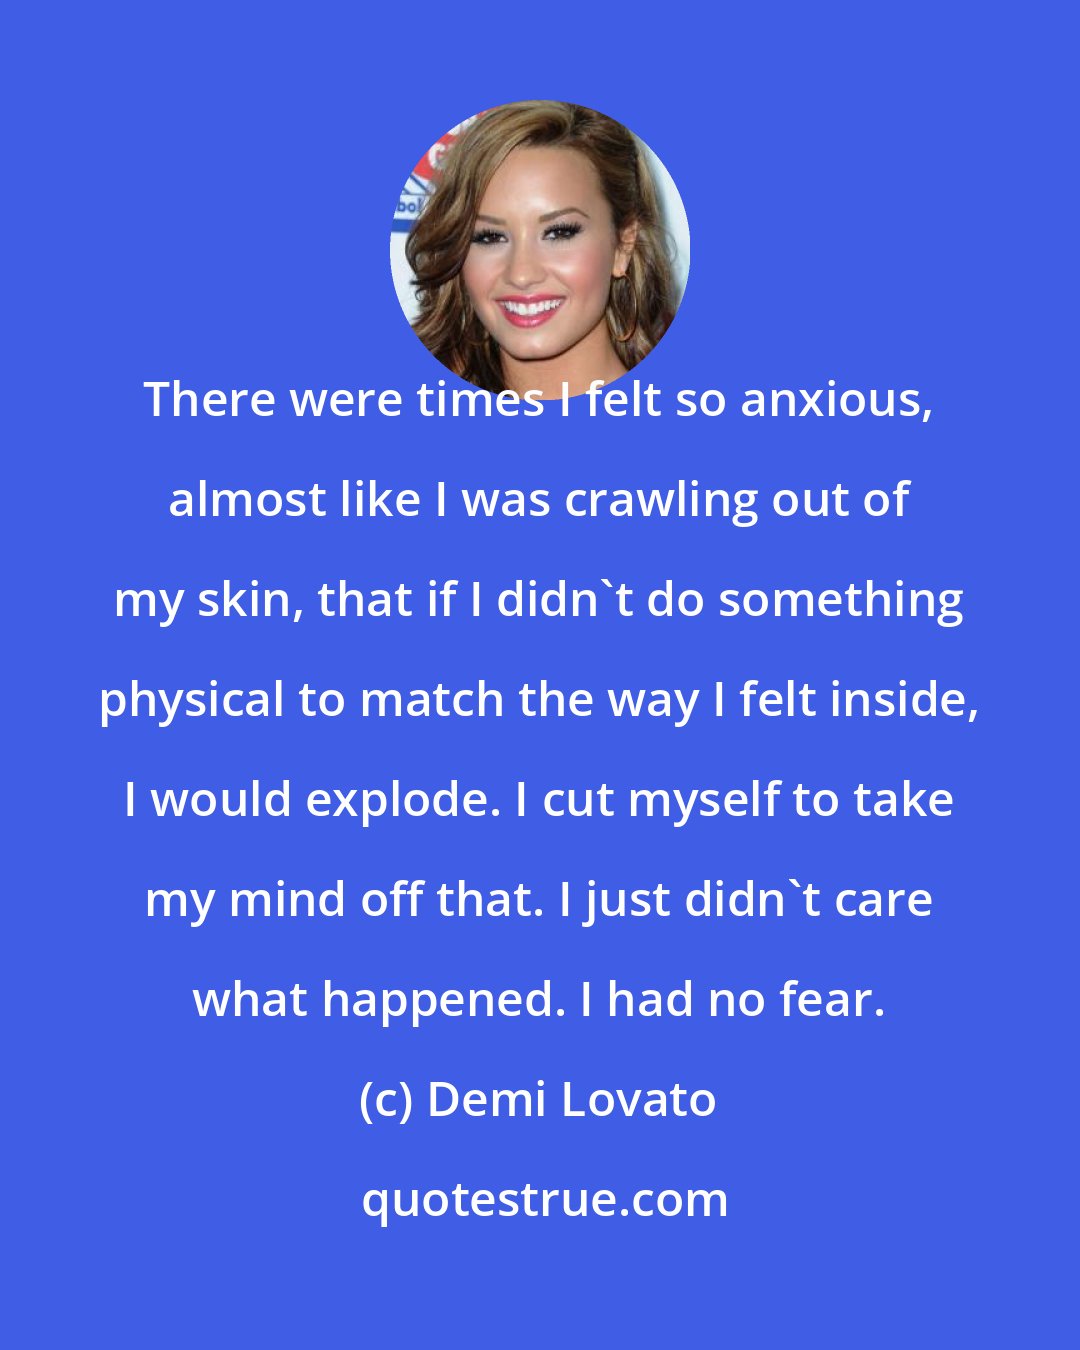 Demi Lovato: There were times I felt so anxious, almost like I was crawling out of my skin, that if I didn't do something physical to match the way I felt inside, I would explode. I cut myself to take my mind off that. I just didn't care what happened. I had no fear.